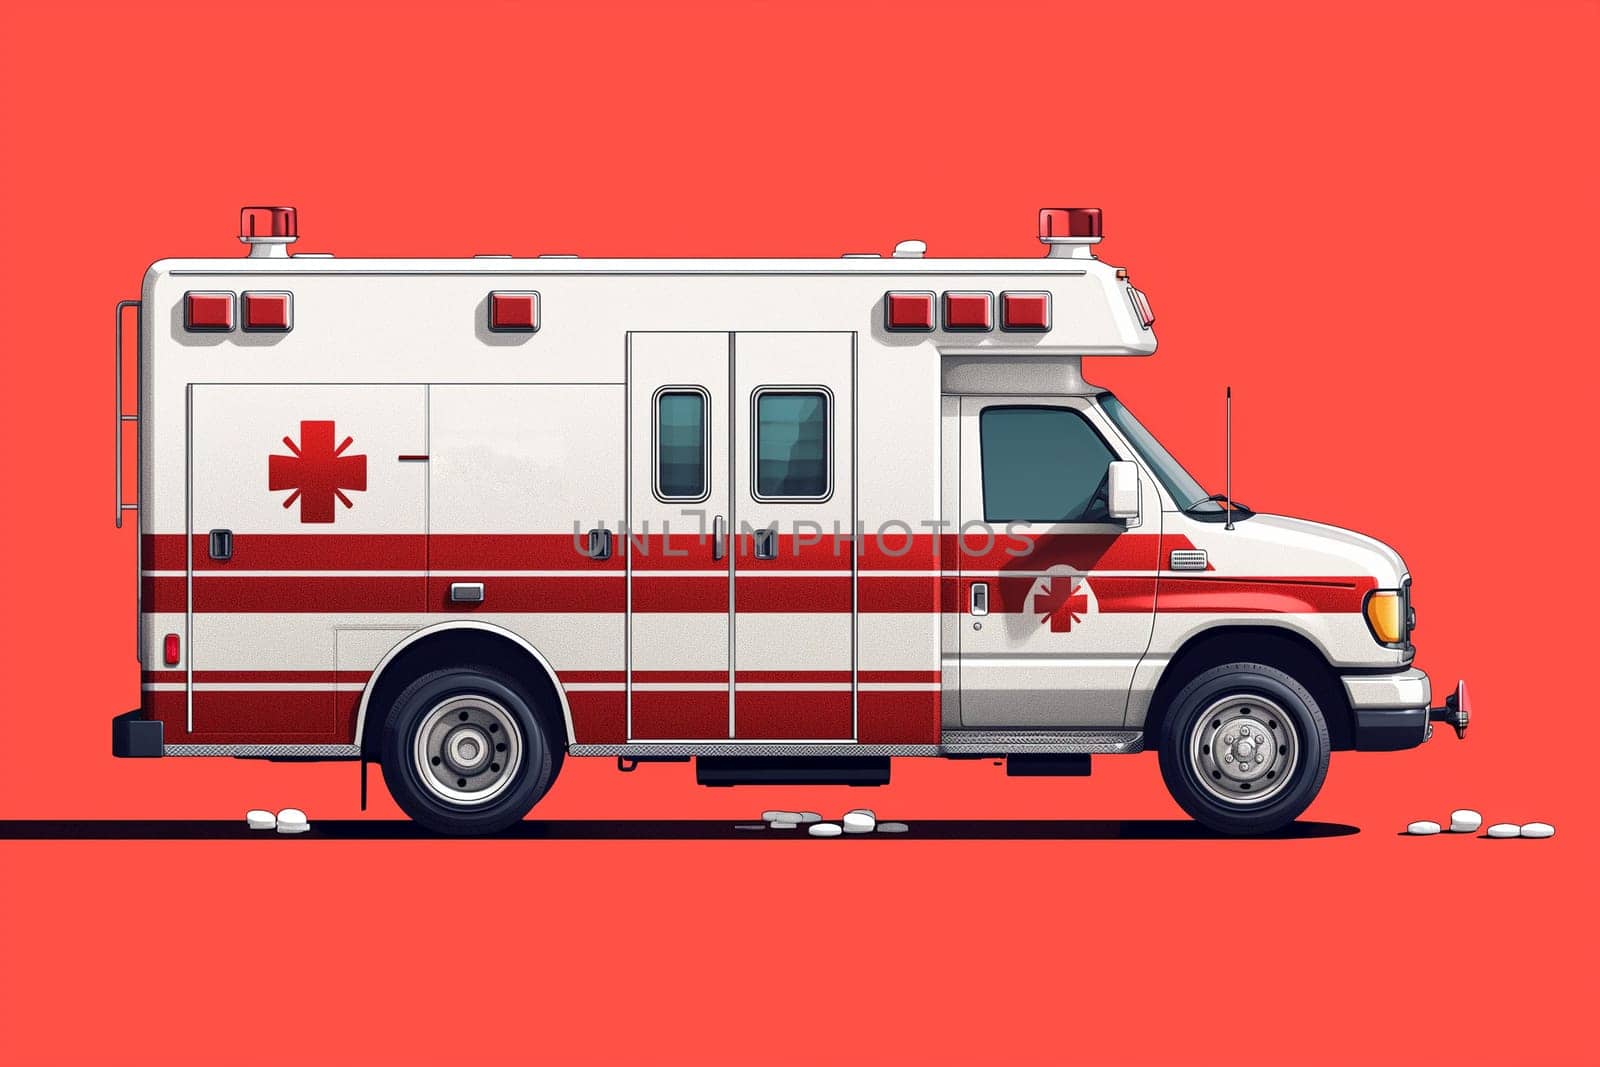 Red and White Ambulance Against Red Background by Sd28DimoN_1976